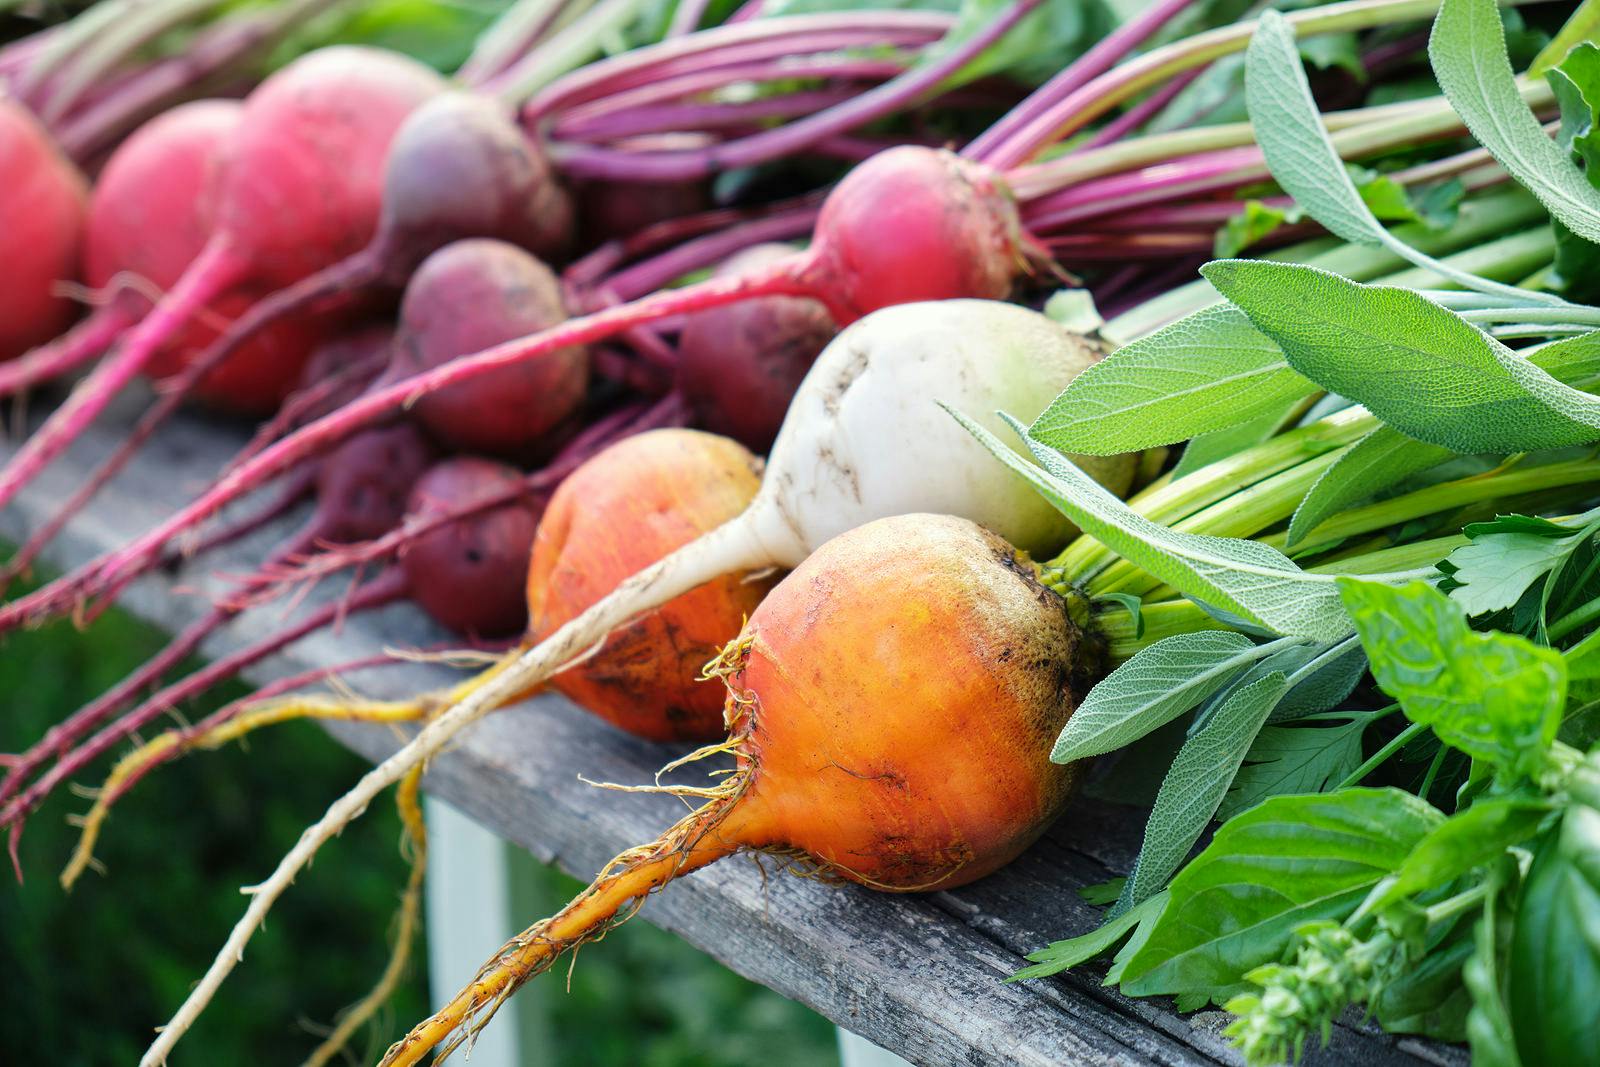 Colorful rainbow beets. Golden, white, pink striped and purple beets on the open air. Organic vegetables.
